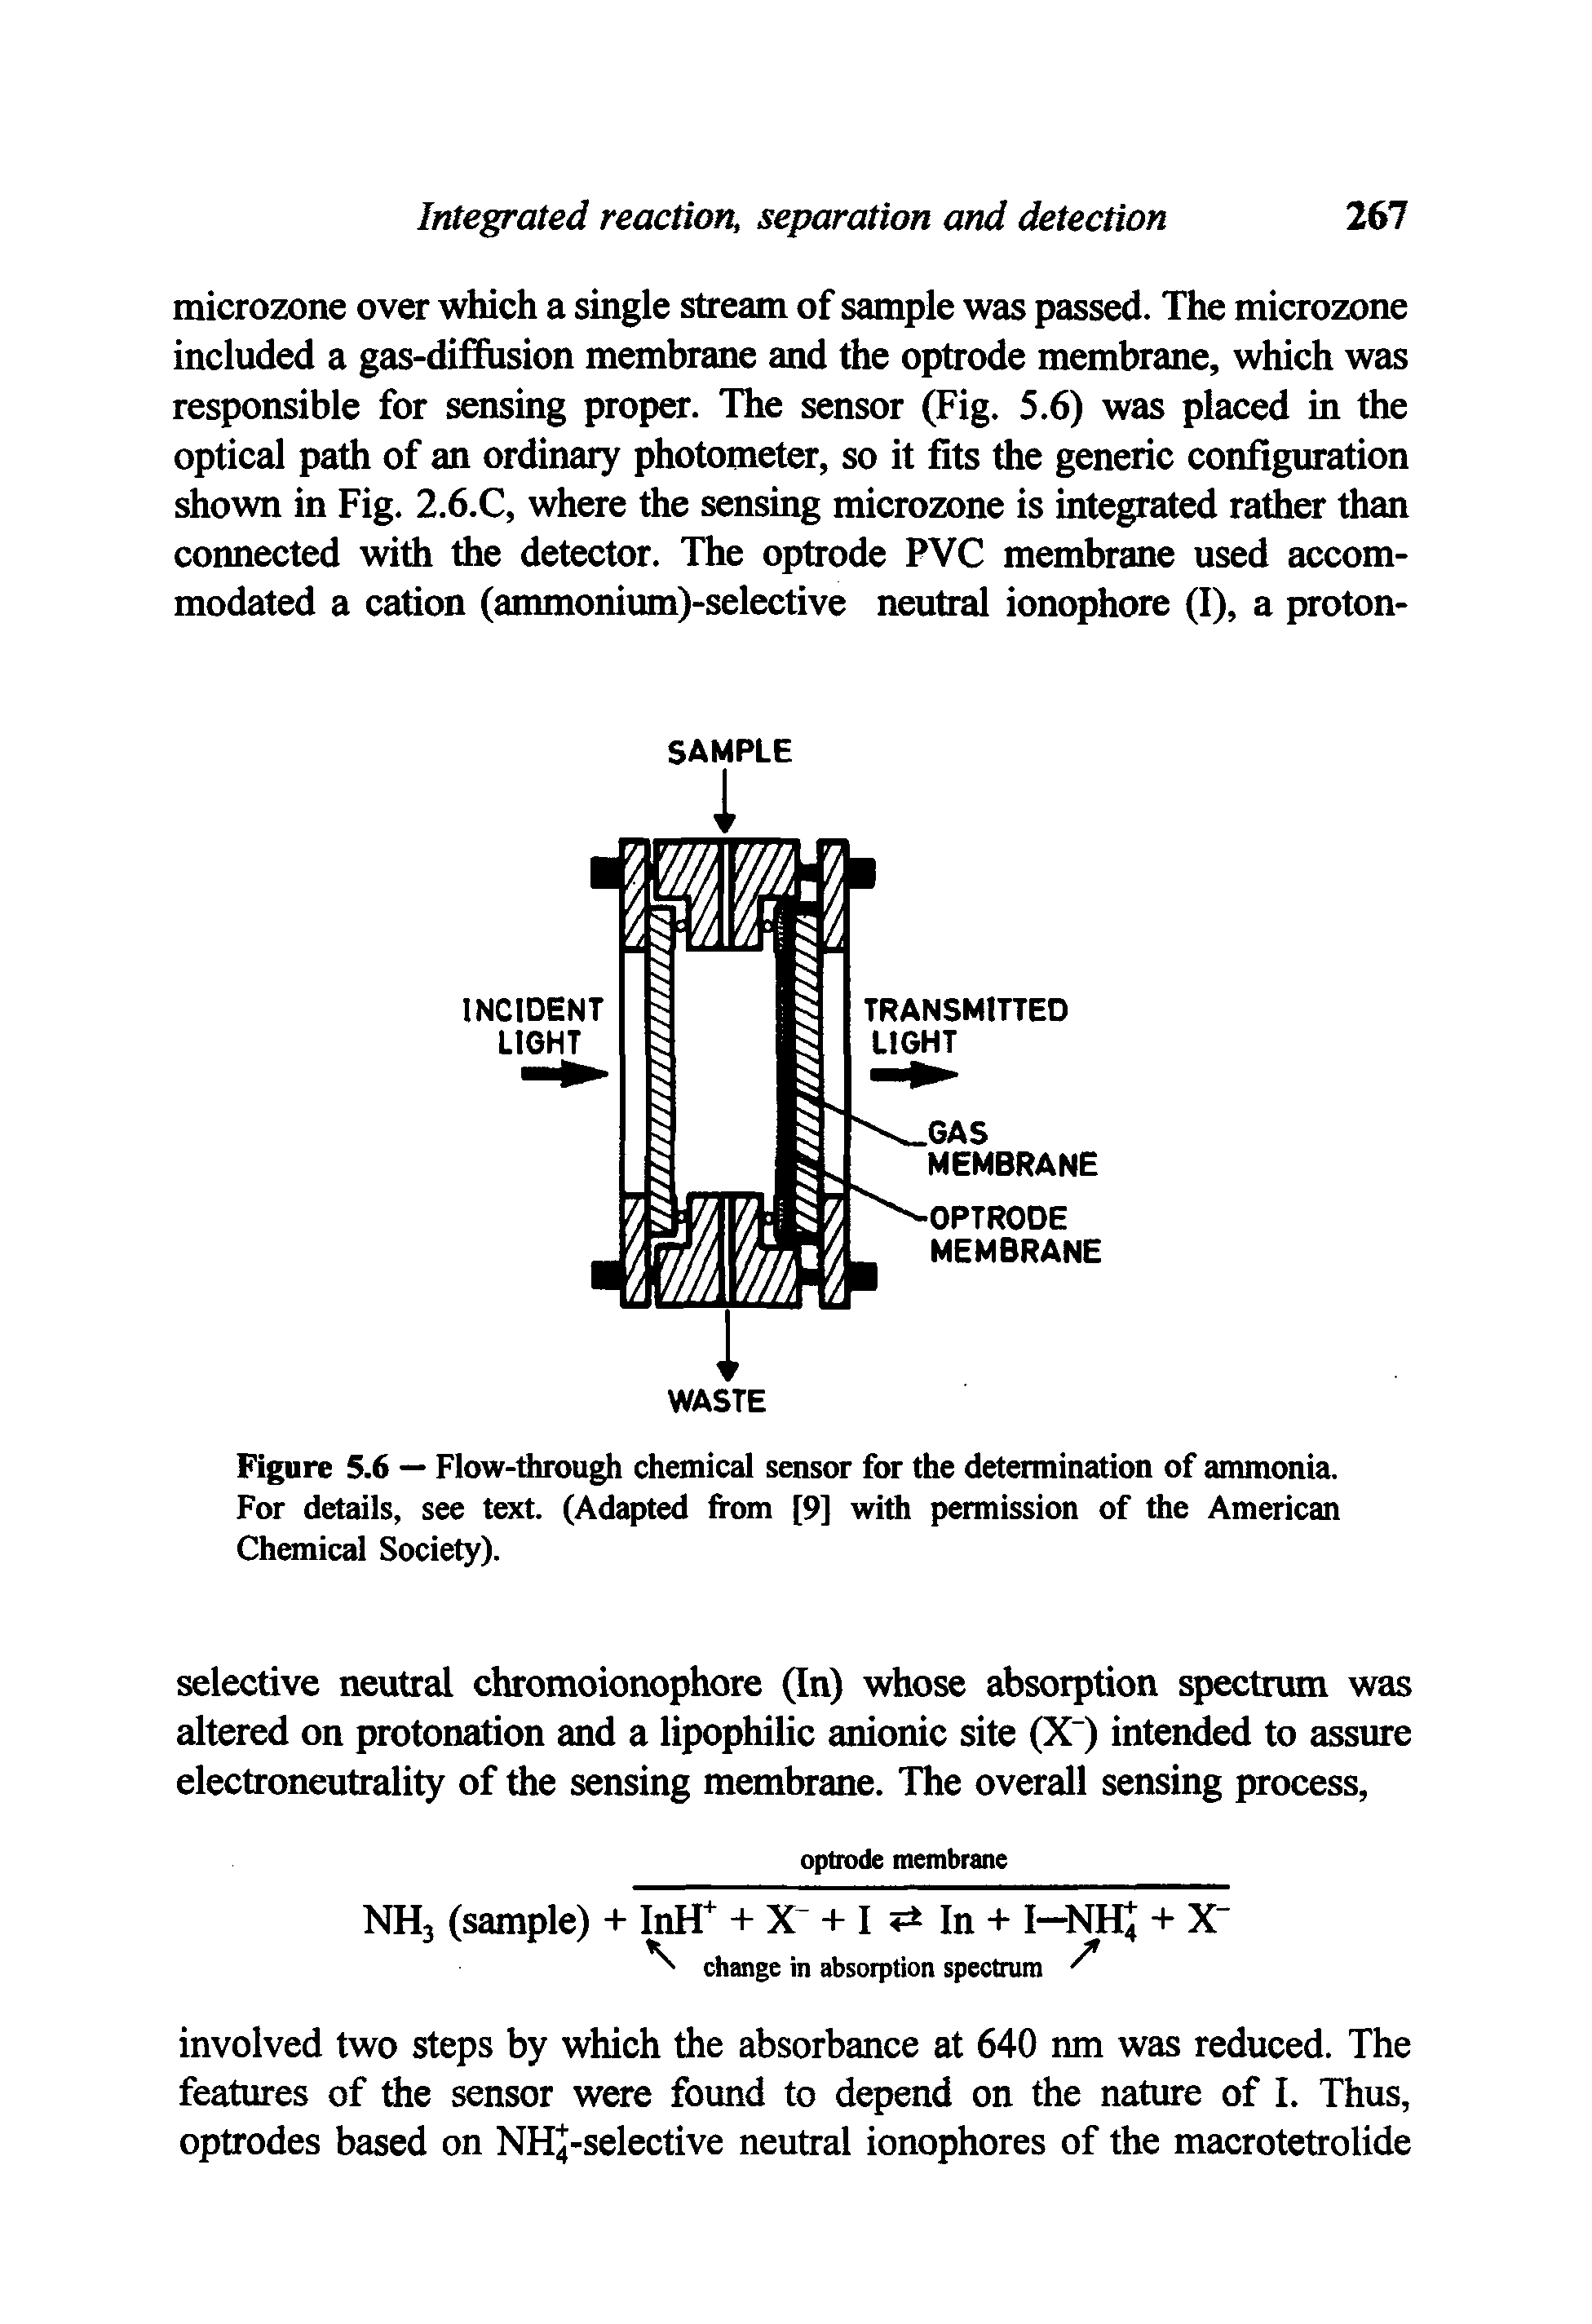 Figure 5.6 — Flow-through chemical sensor for the determination of ammonia. For details, see text. (Adapted from [9] with permission of the American Chemical Society).